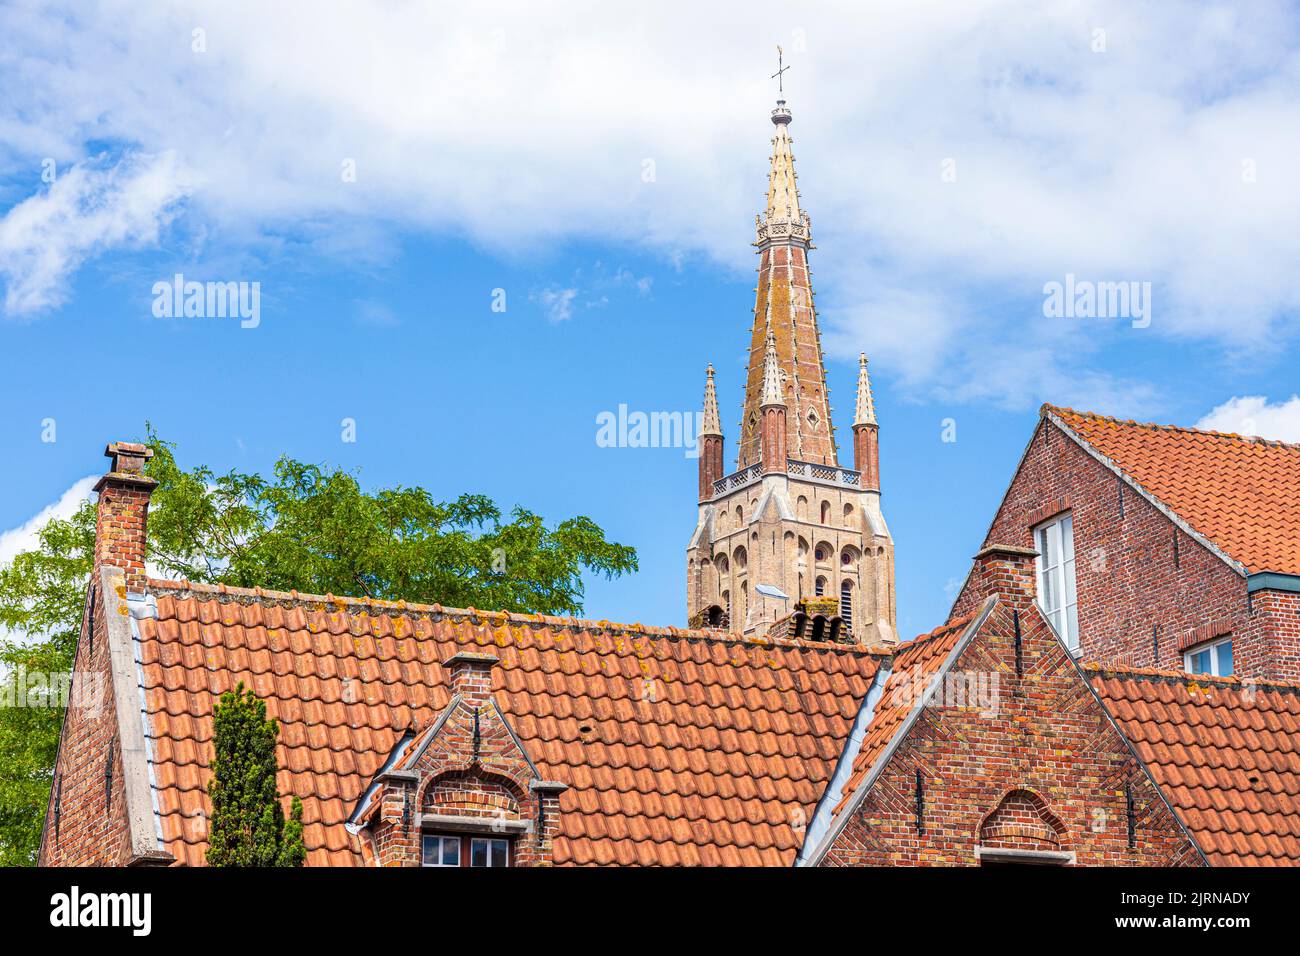 The spire of the Church of Our Lady (Onze-Lieve-Vrouwekerk) overlooking pantiled rooves of old houses in Bruges, Belgium Stock Photo